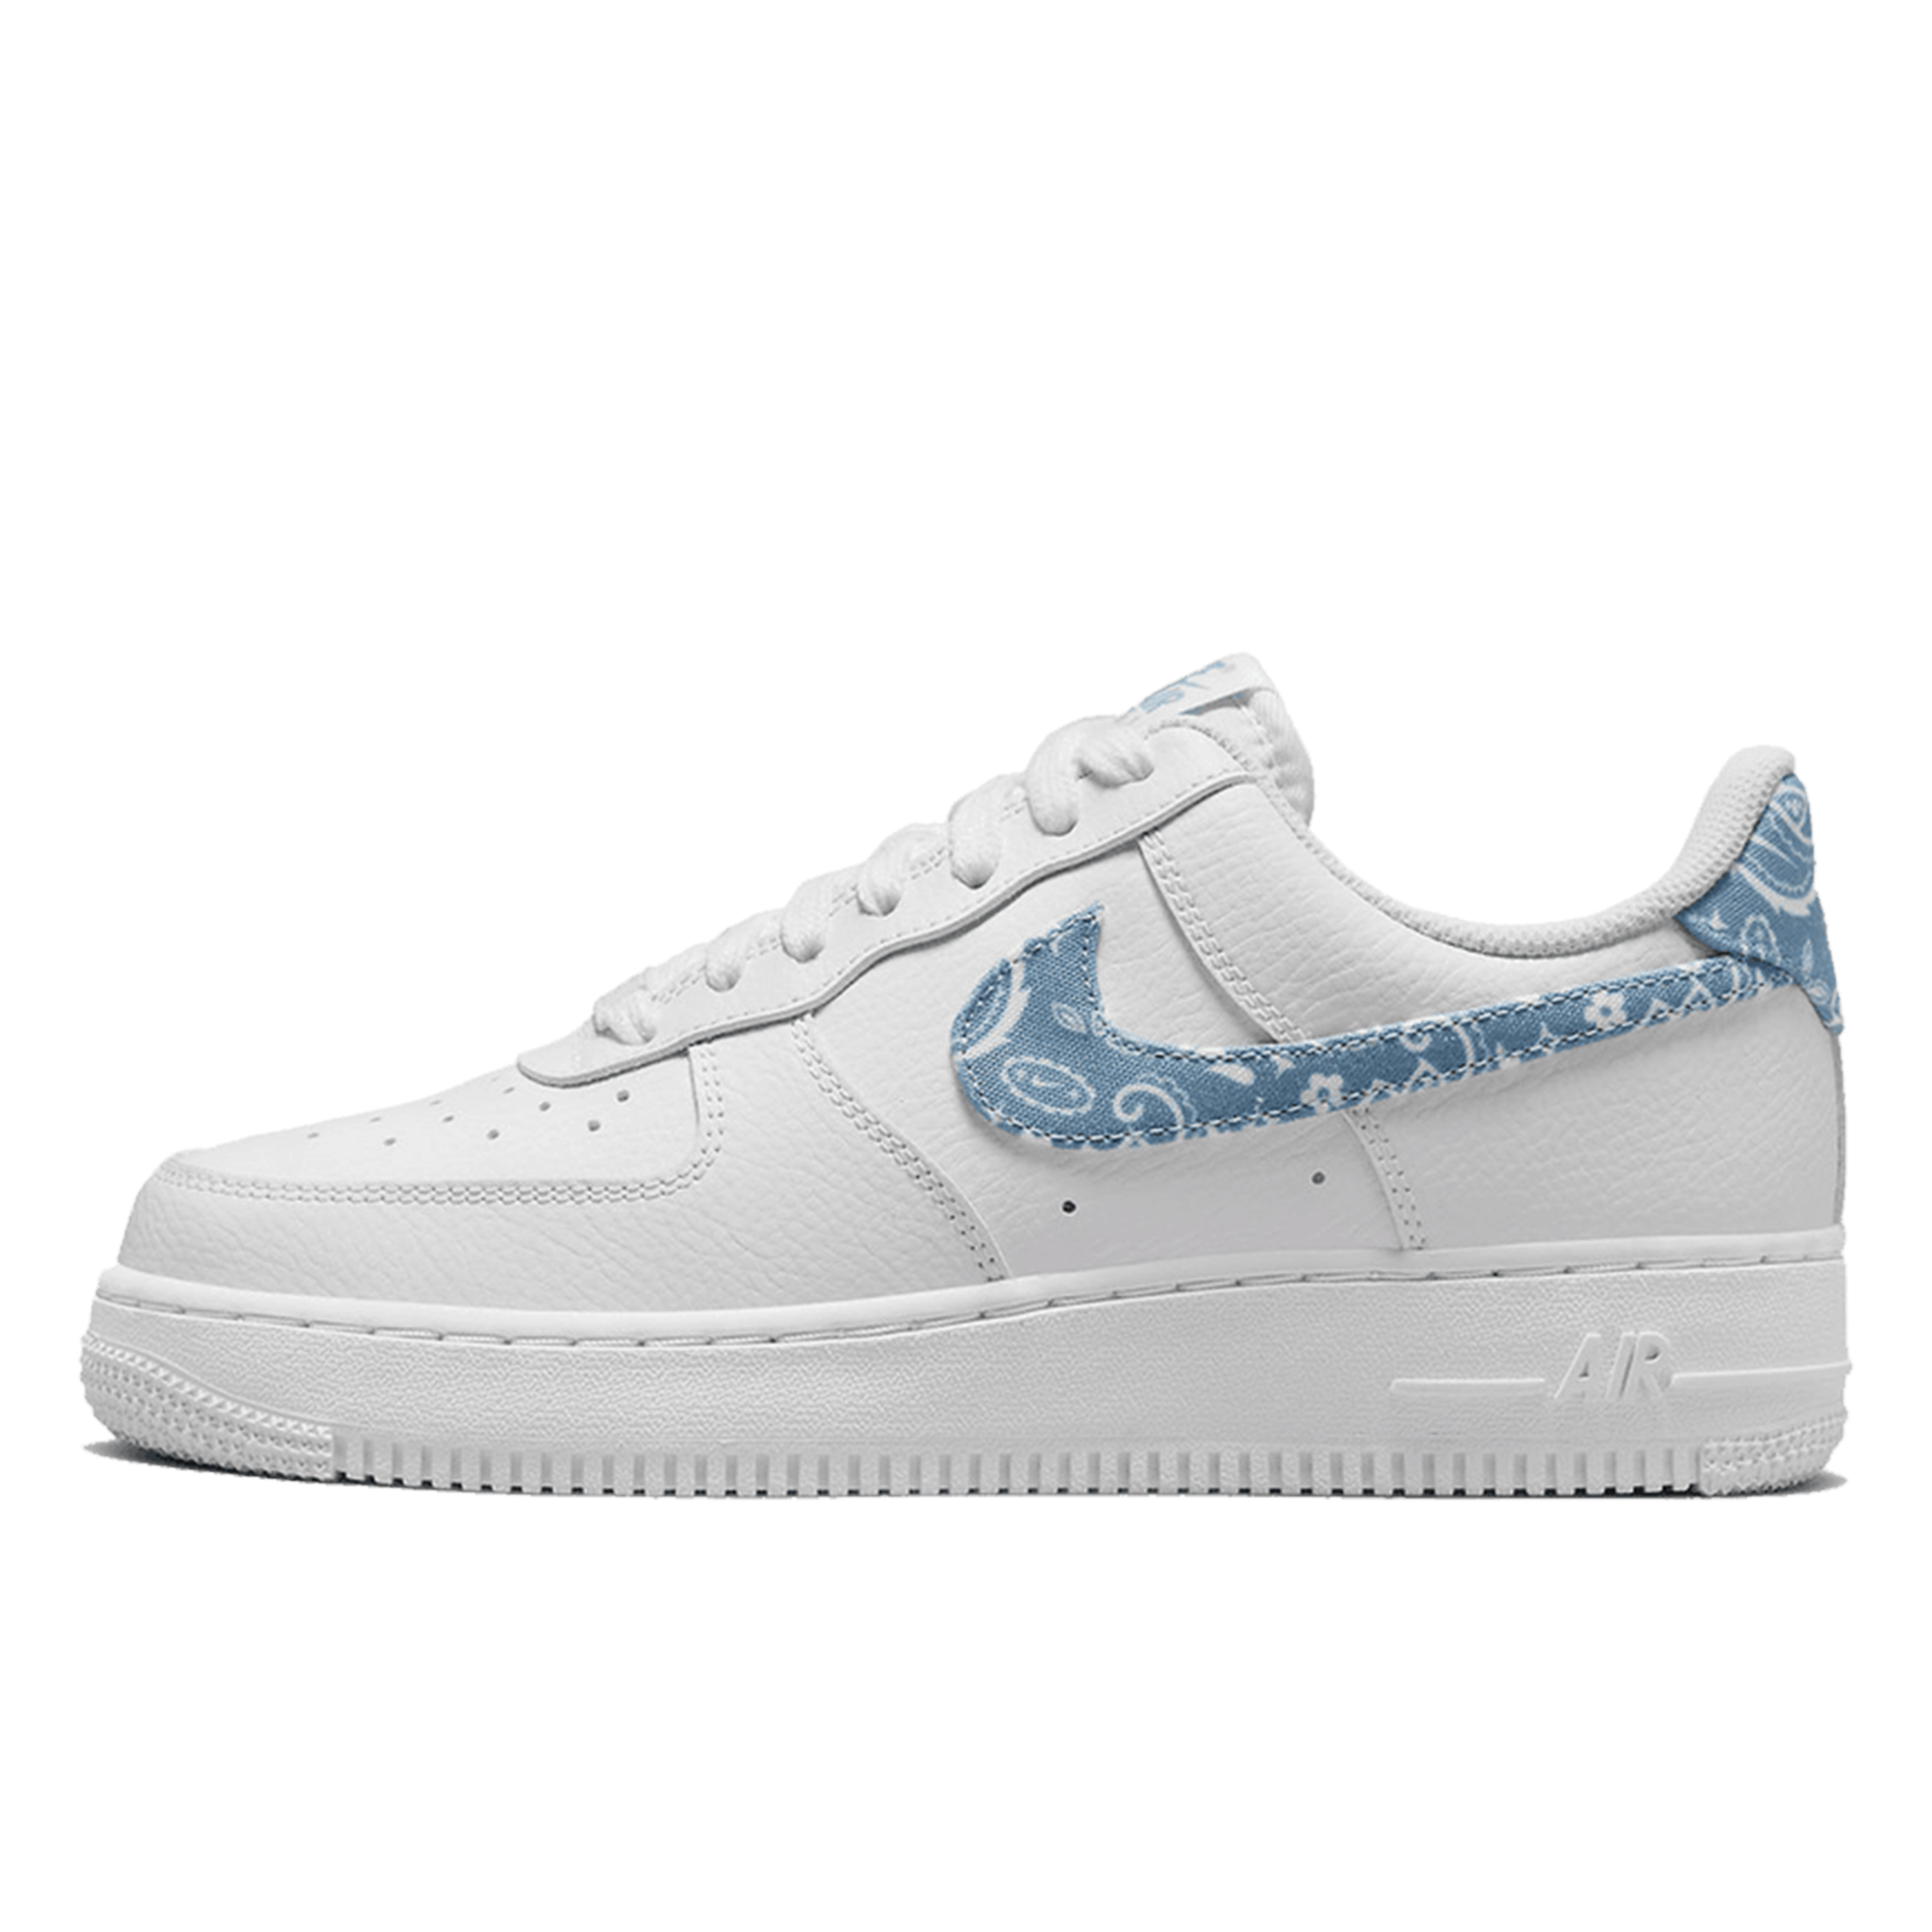 Nike Air Force 1 Low 07 Essential "White Worn Blue Paisley" (W)